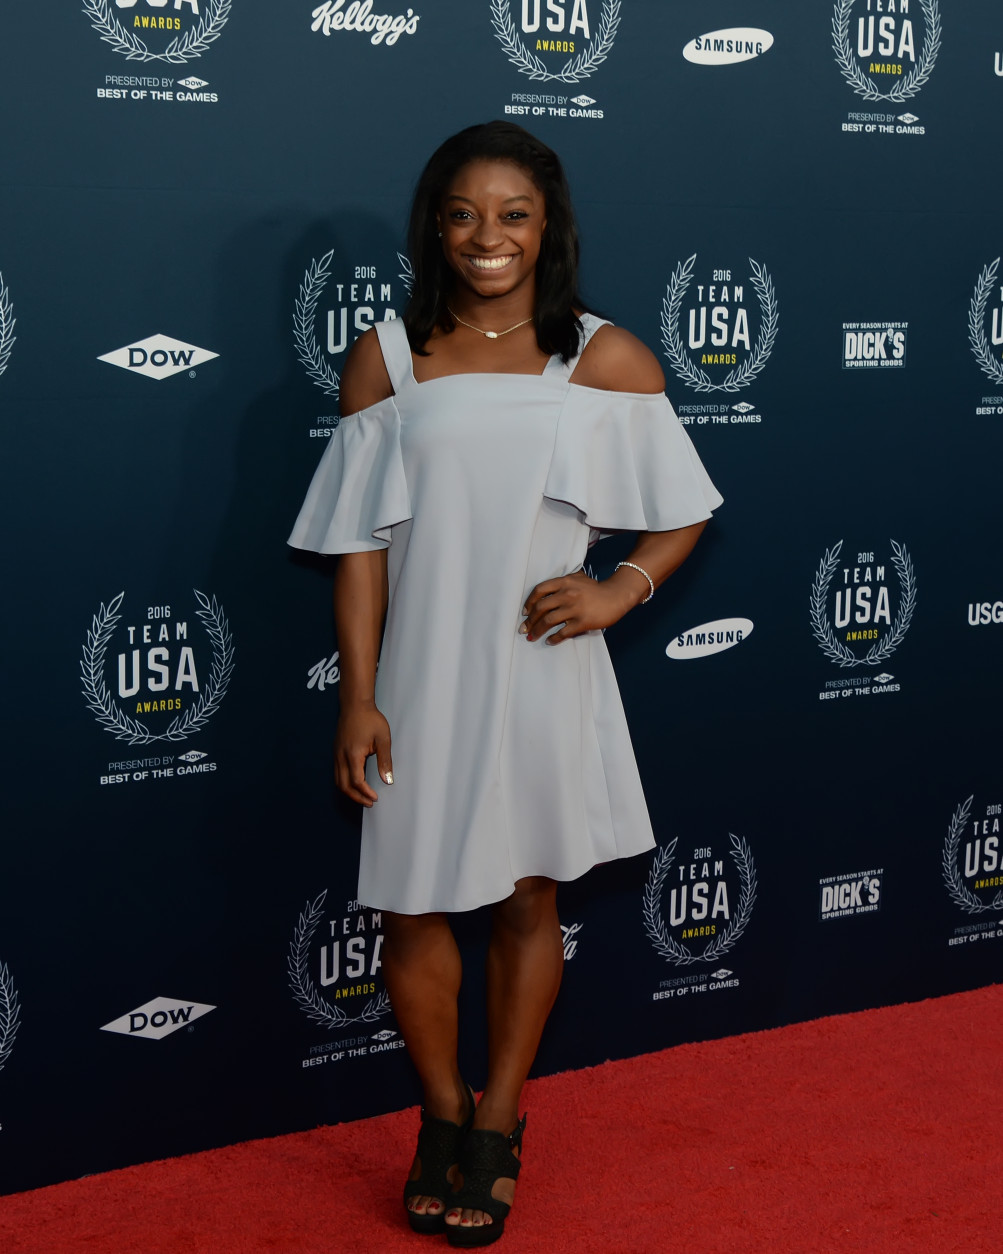 Gymnast and gold medalist Simone Biles poses on the red carpet of the Team USA Awards. (Courtesy Shannon Finney, <a href="http://www.shannonfinneyphotography.com">www.shannonfinneyphotography.com</a>)